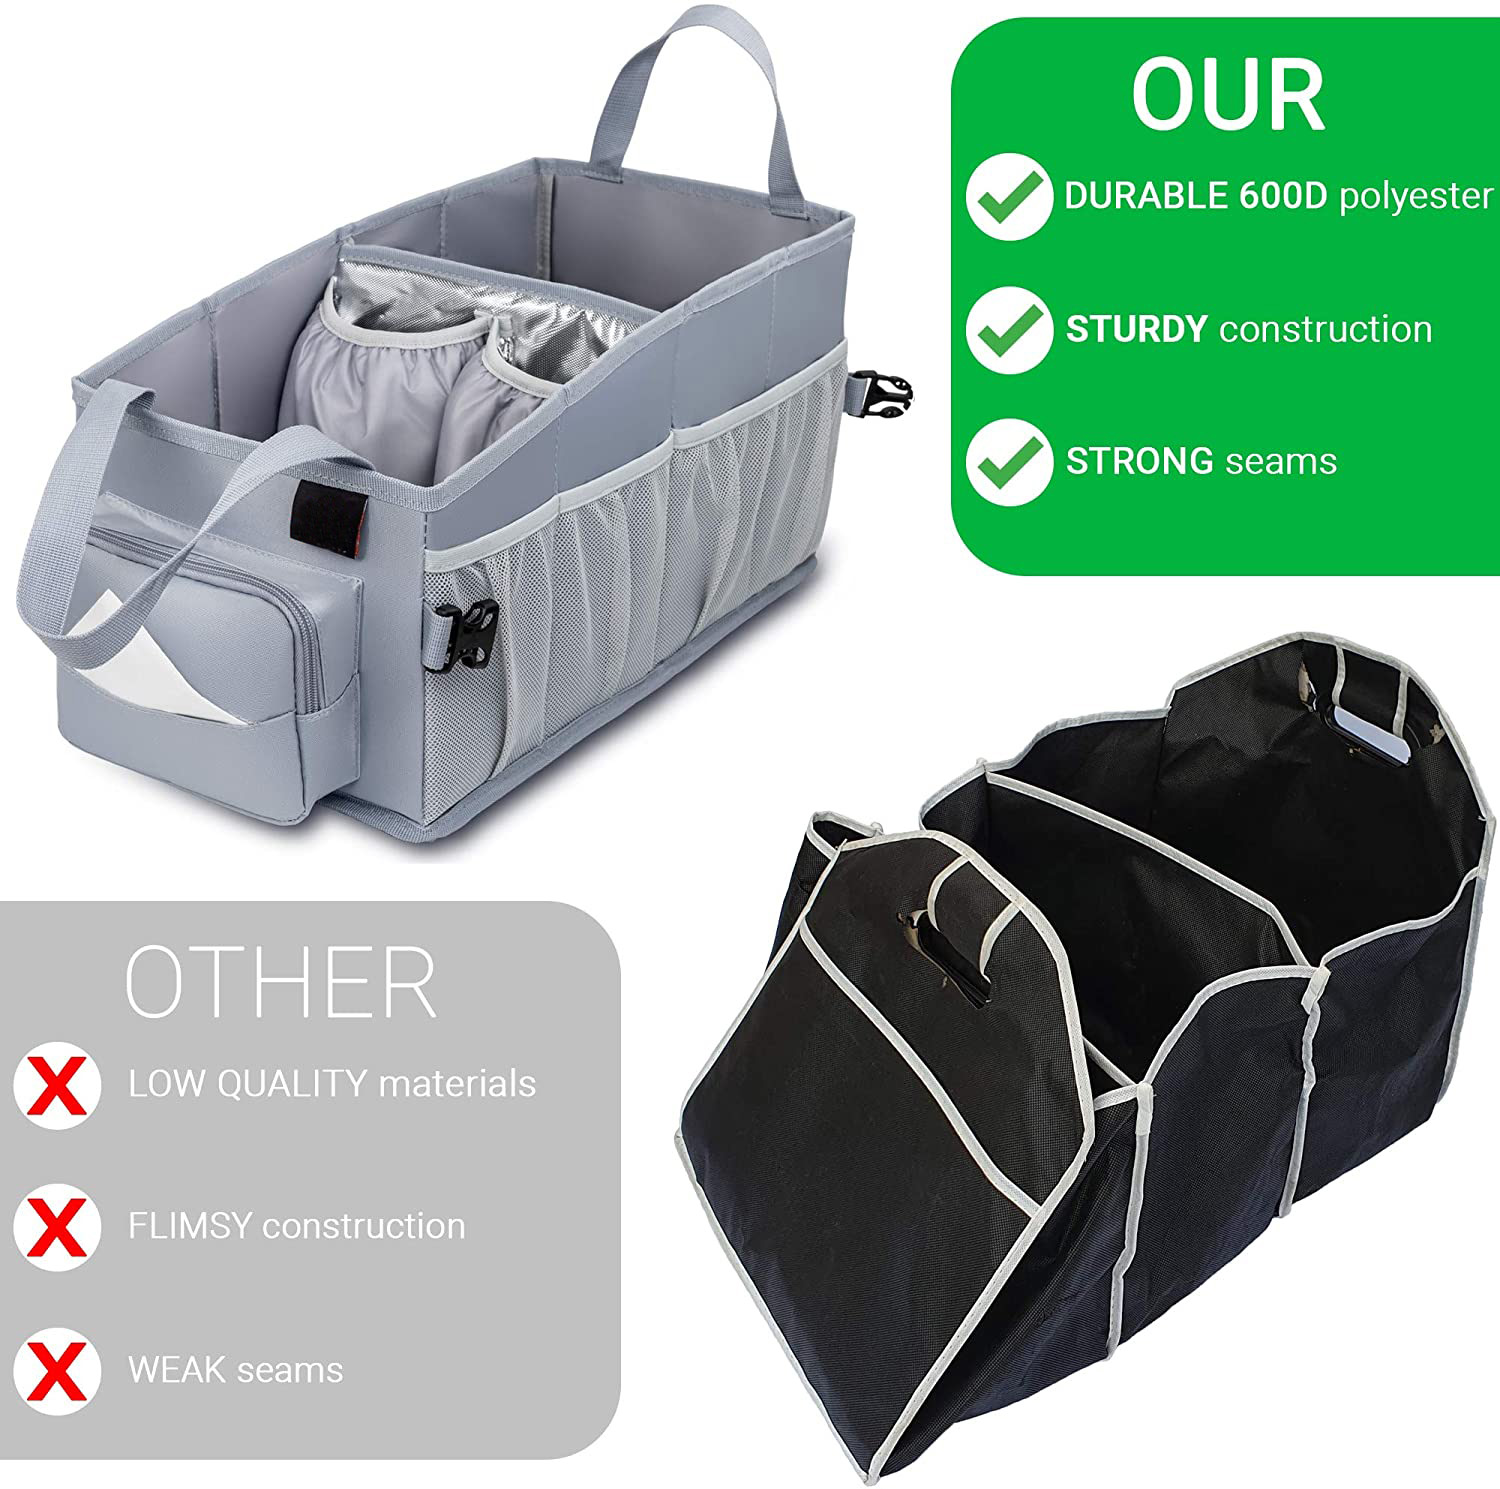 Car Organizer Between Seats Easy-to-Reach for Back Seat Travel Car Organizer with Tissue Box and Insulated Cup Holder